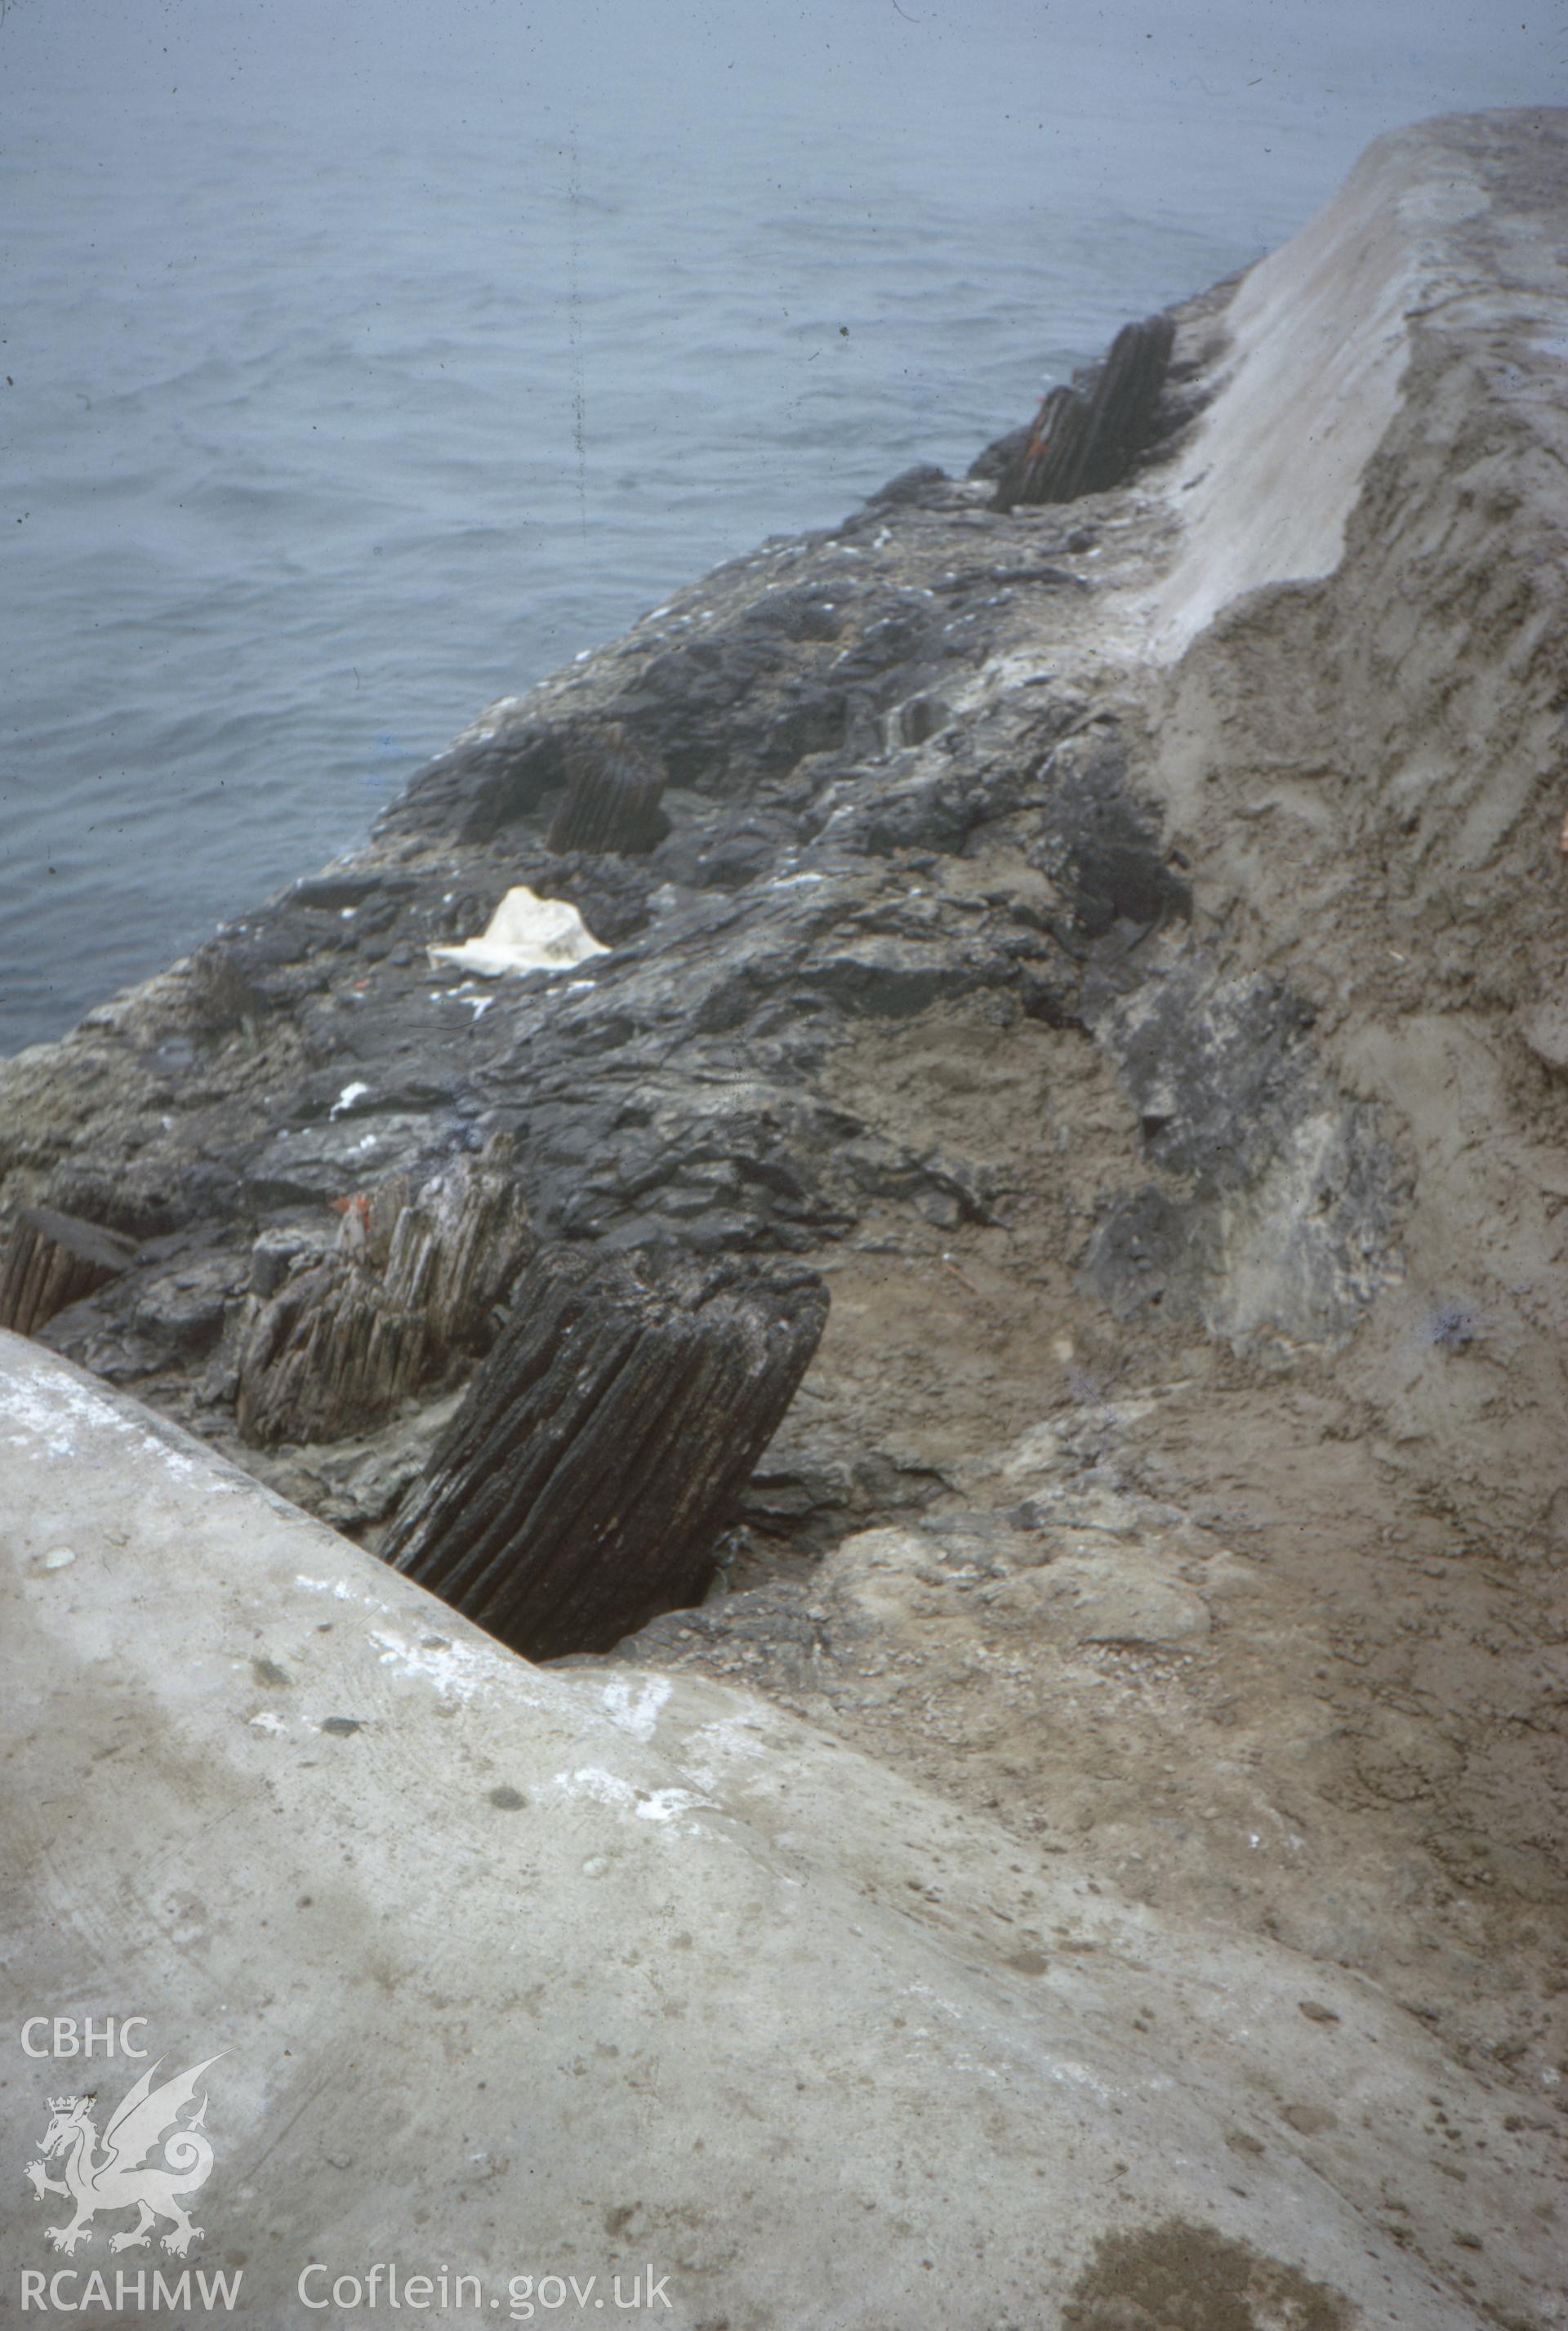 Colour slide showing posts of the wooden lighthouse.